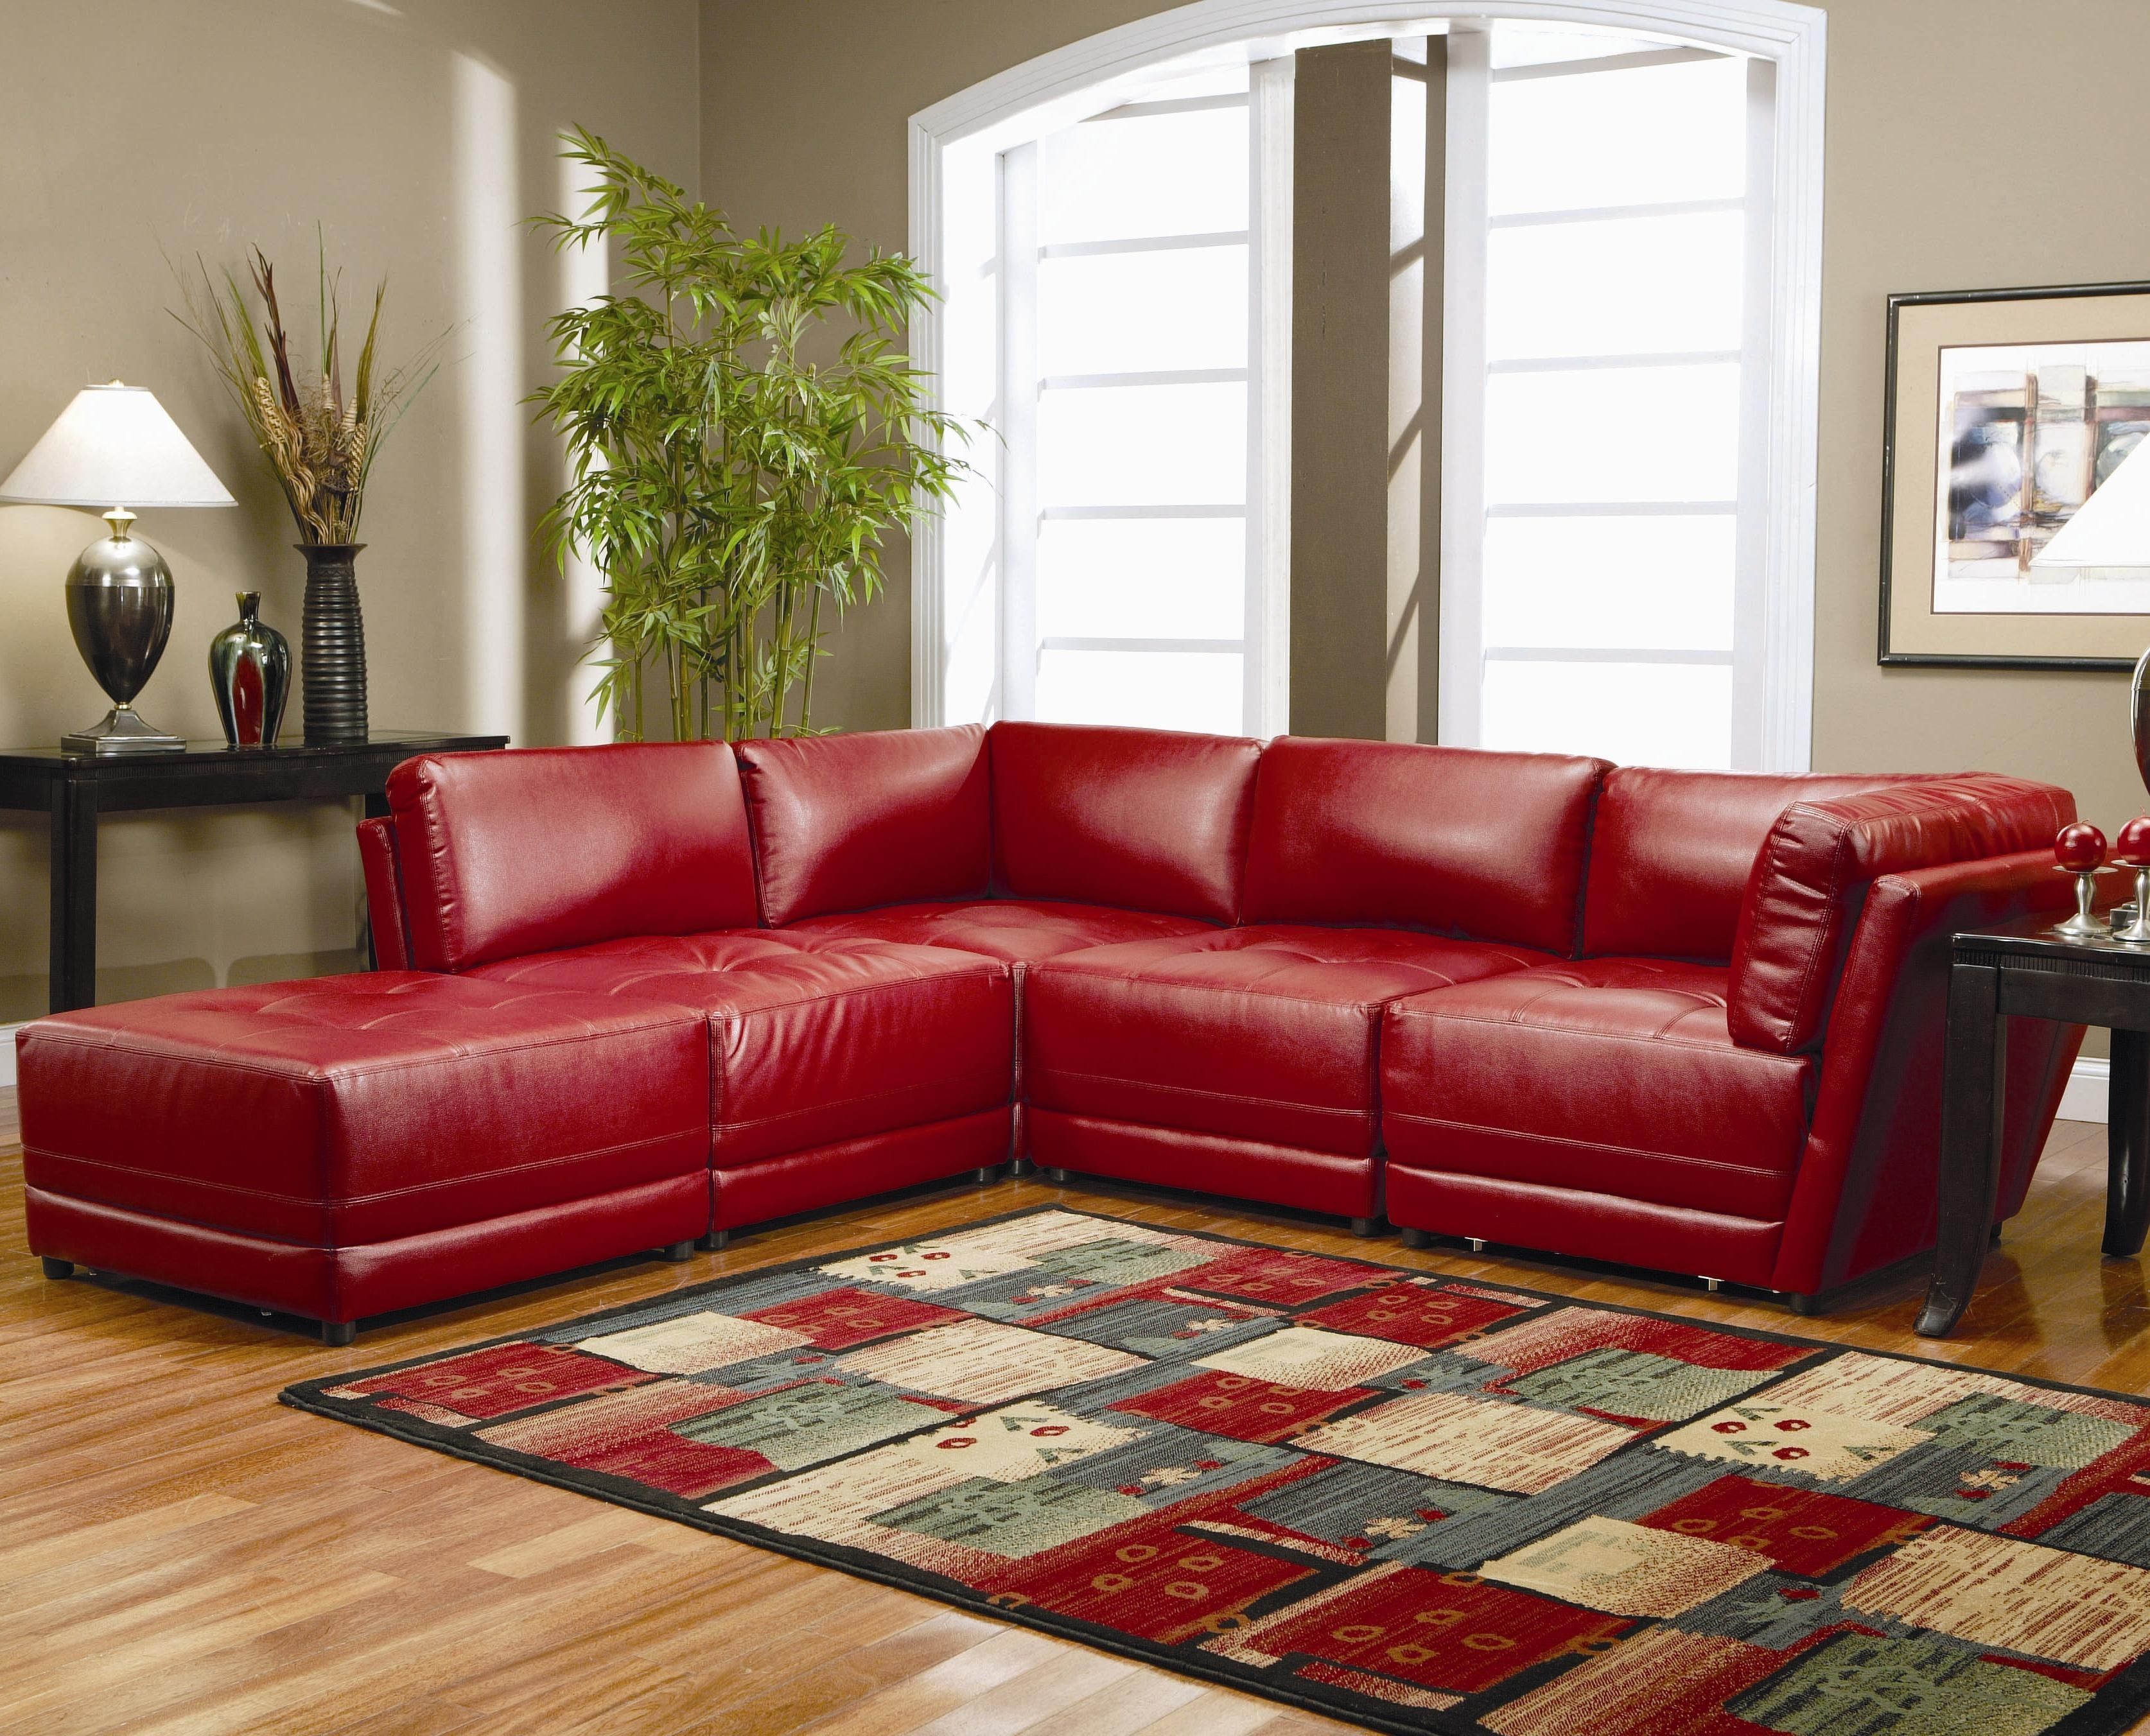 Warm Red Leather Sectional L Shaped Sofa Design Ideas For Living Throughout Red Leather Sectionals With Chaise 